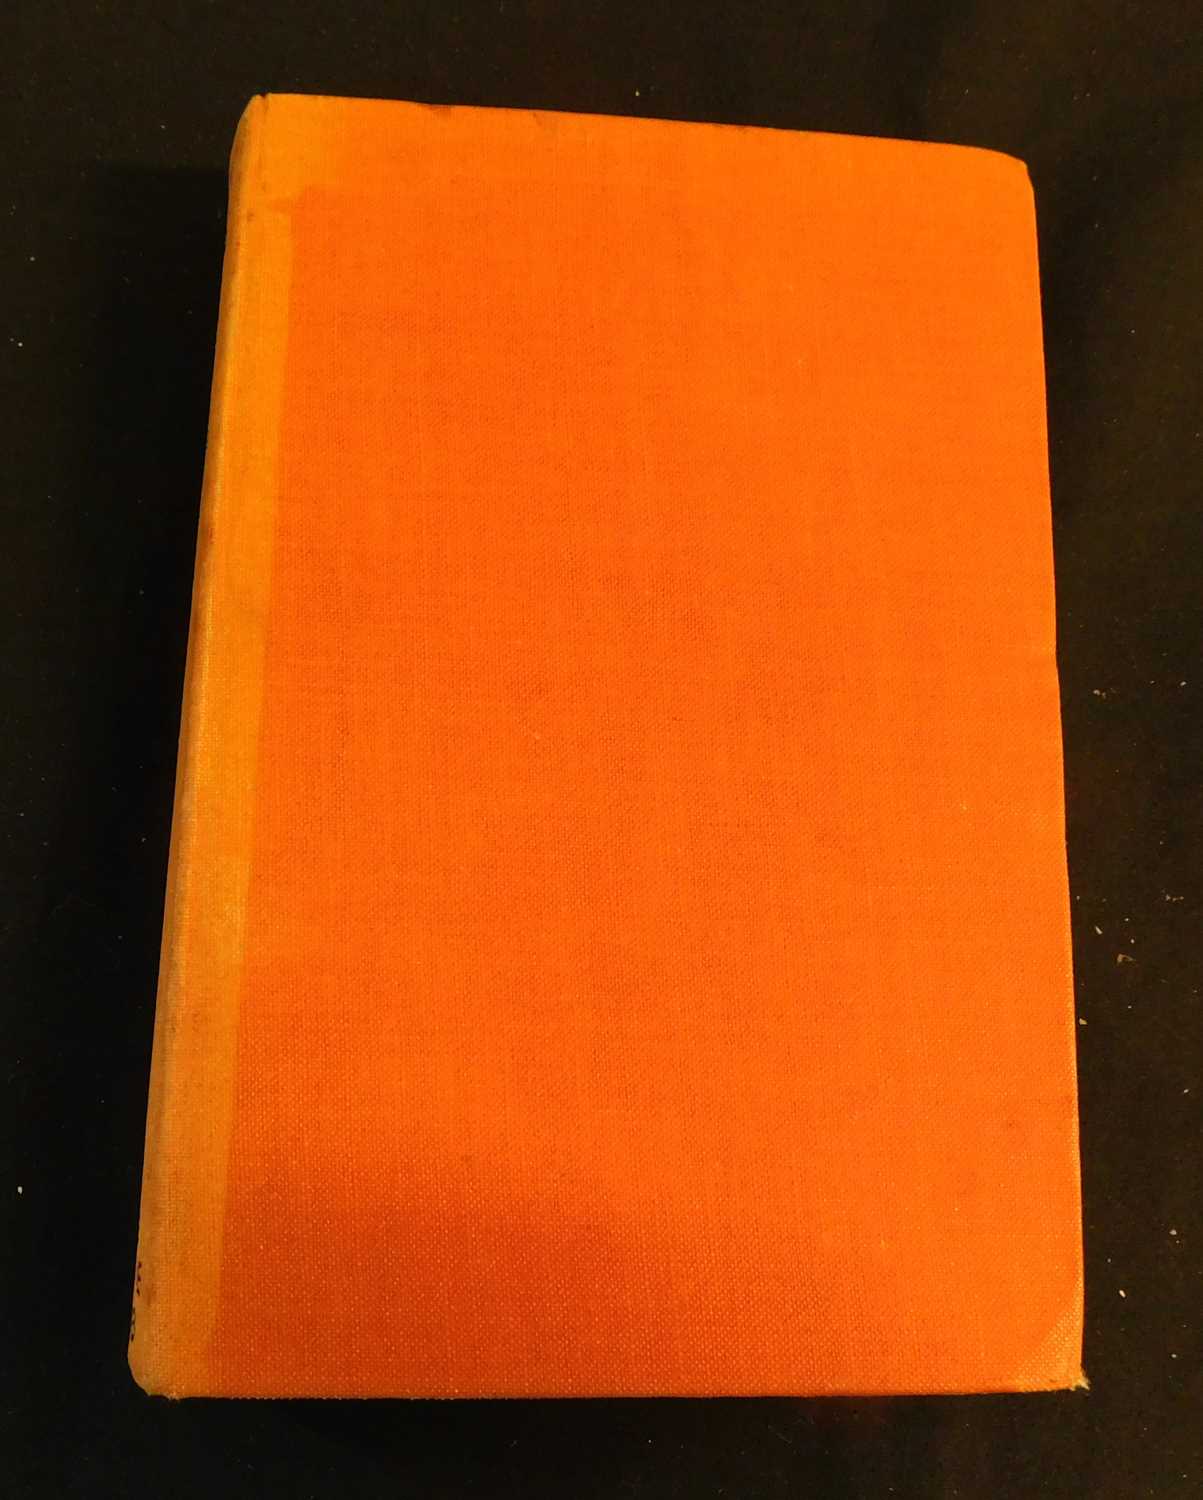 AGATHA CHRISTIE: DEATH ON THE NILE, London, Collins for The Crime Club, 1937, 1st edition, 4pp - Image 2 of 2